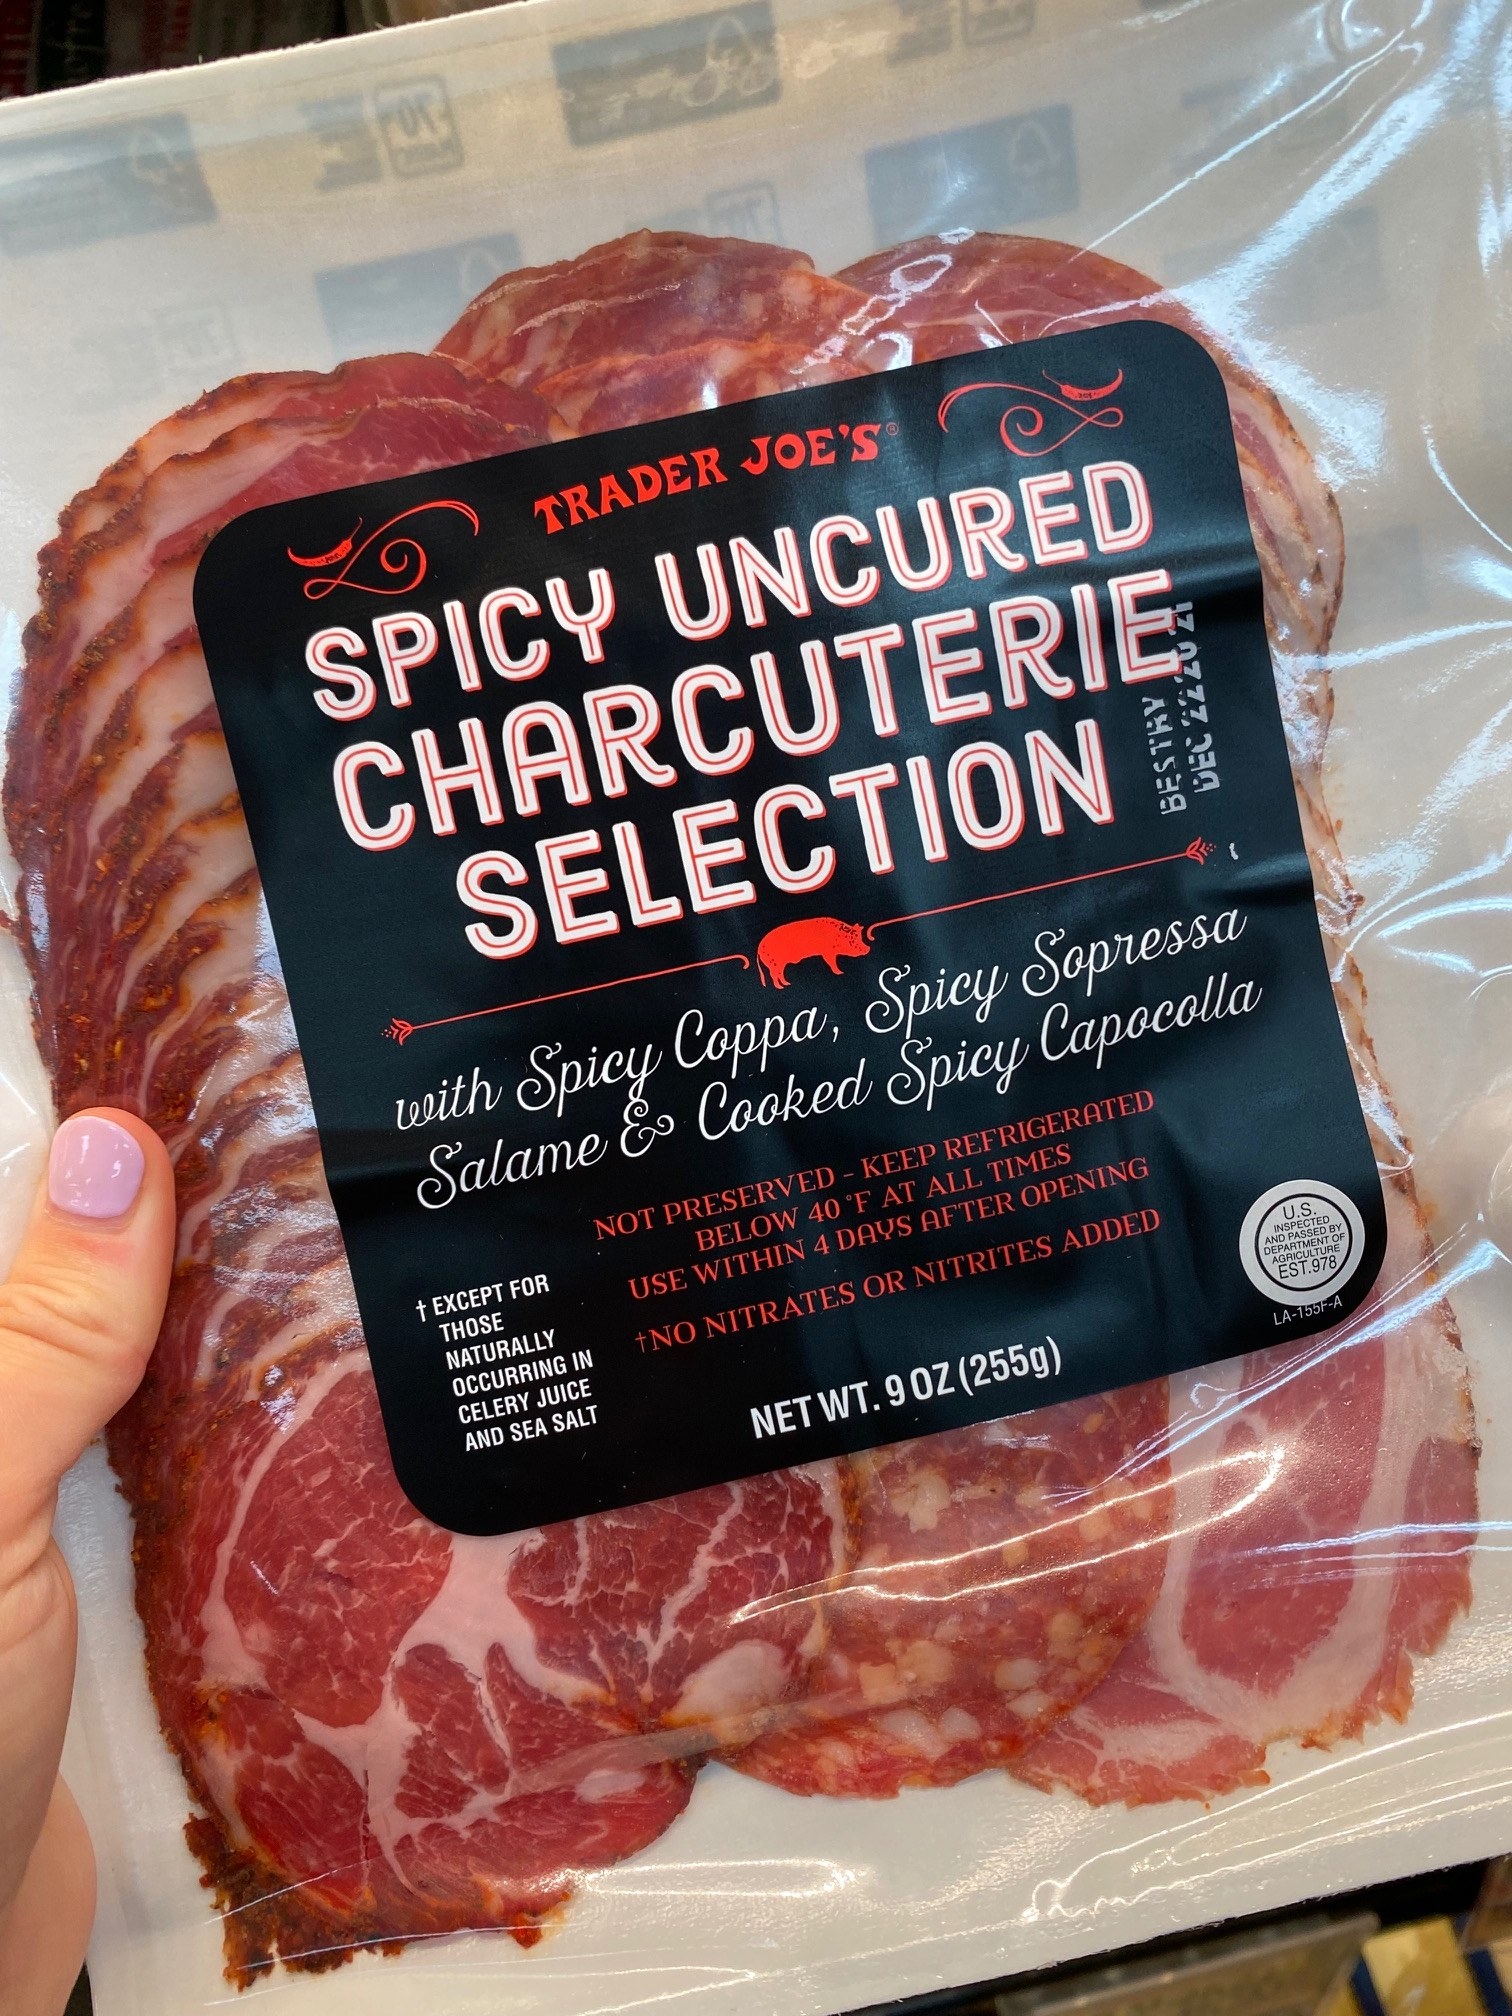 Spicy Uncured Charcuterie Selection